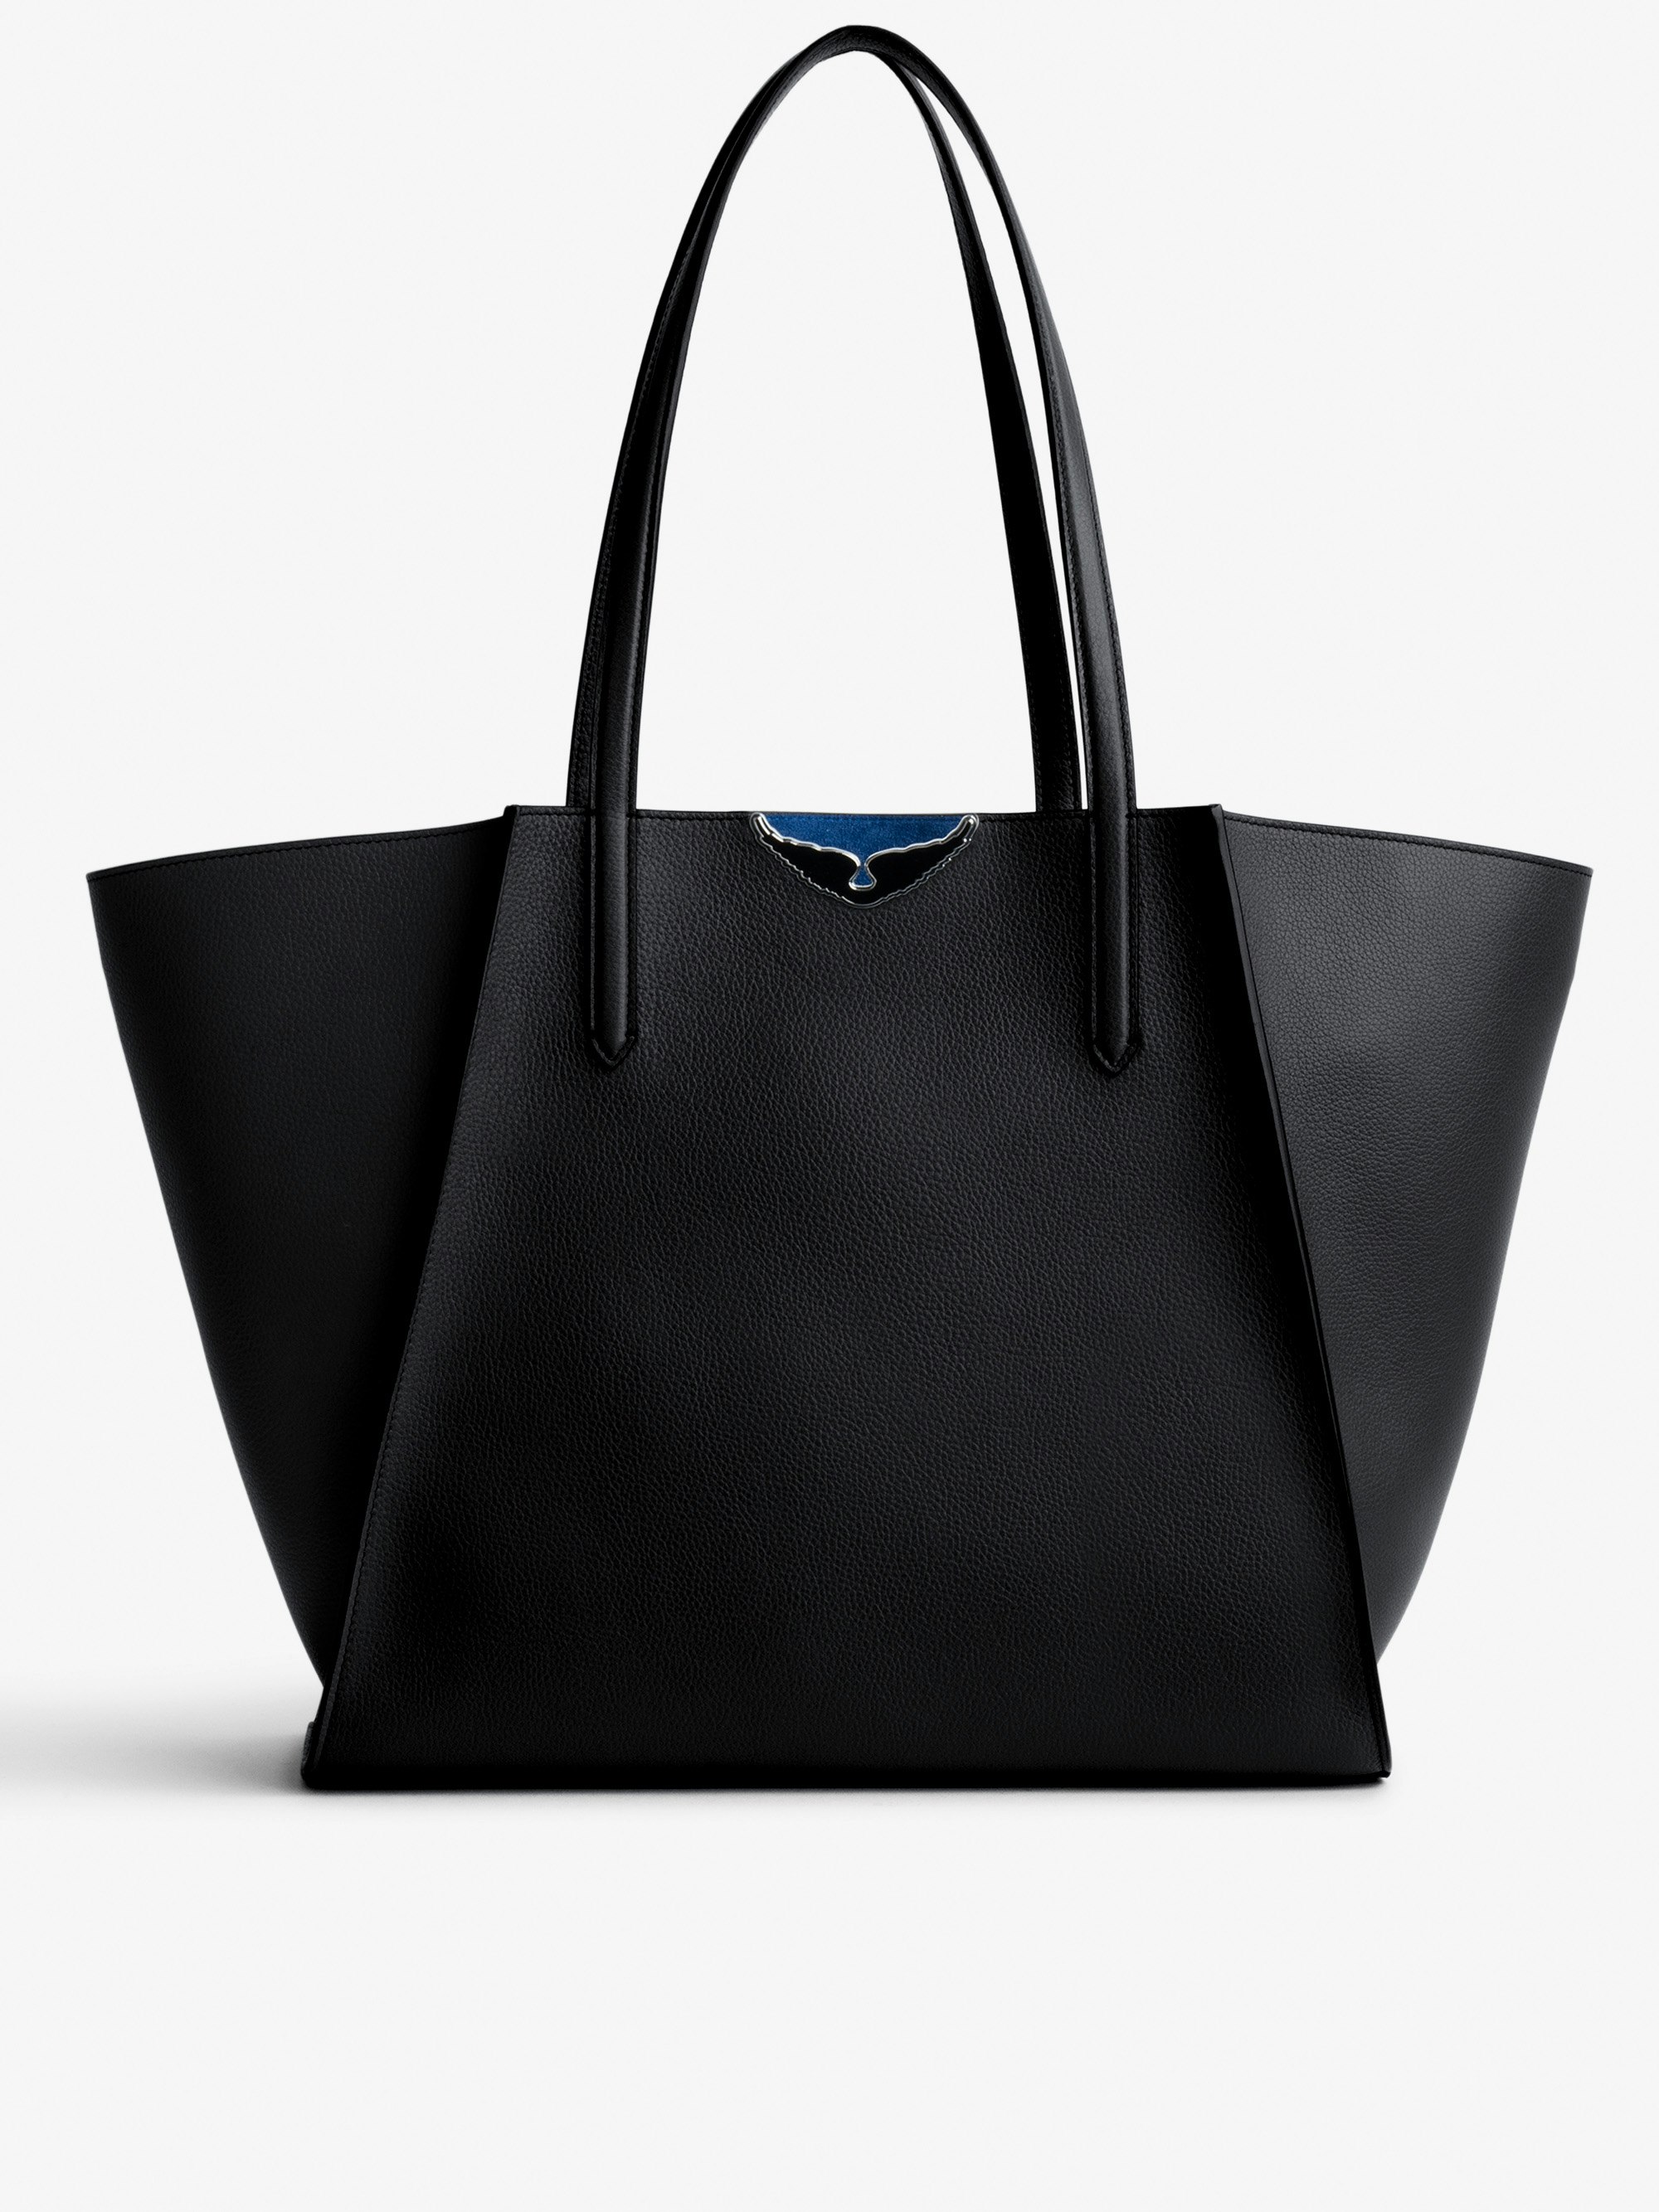 Le Borderline Bag - Women’s tote bag in black grained leather and blue suede with black lacquered wings